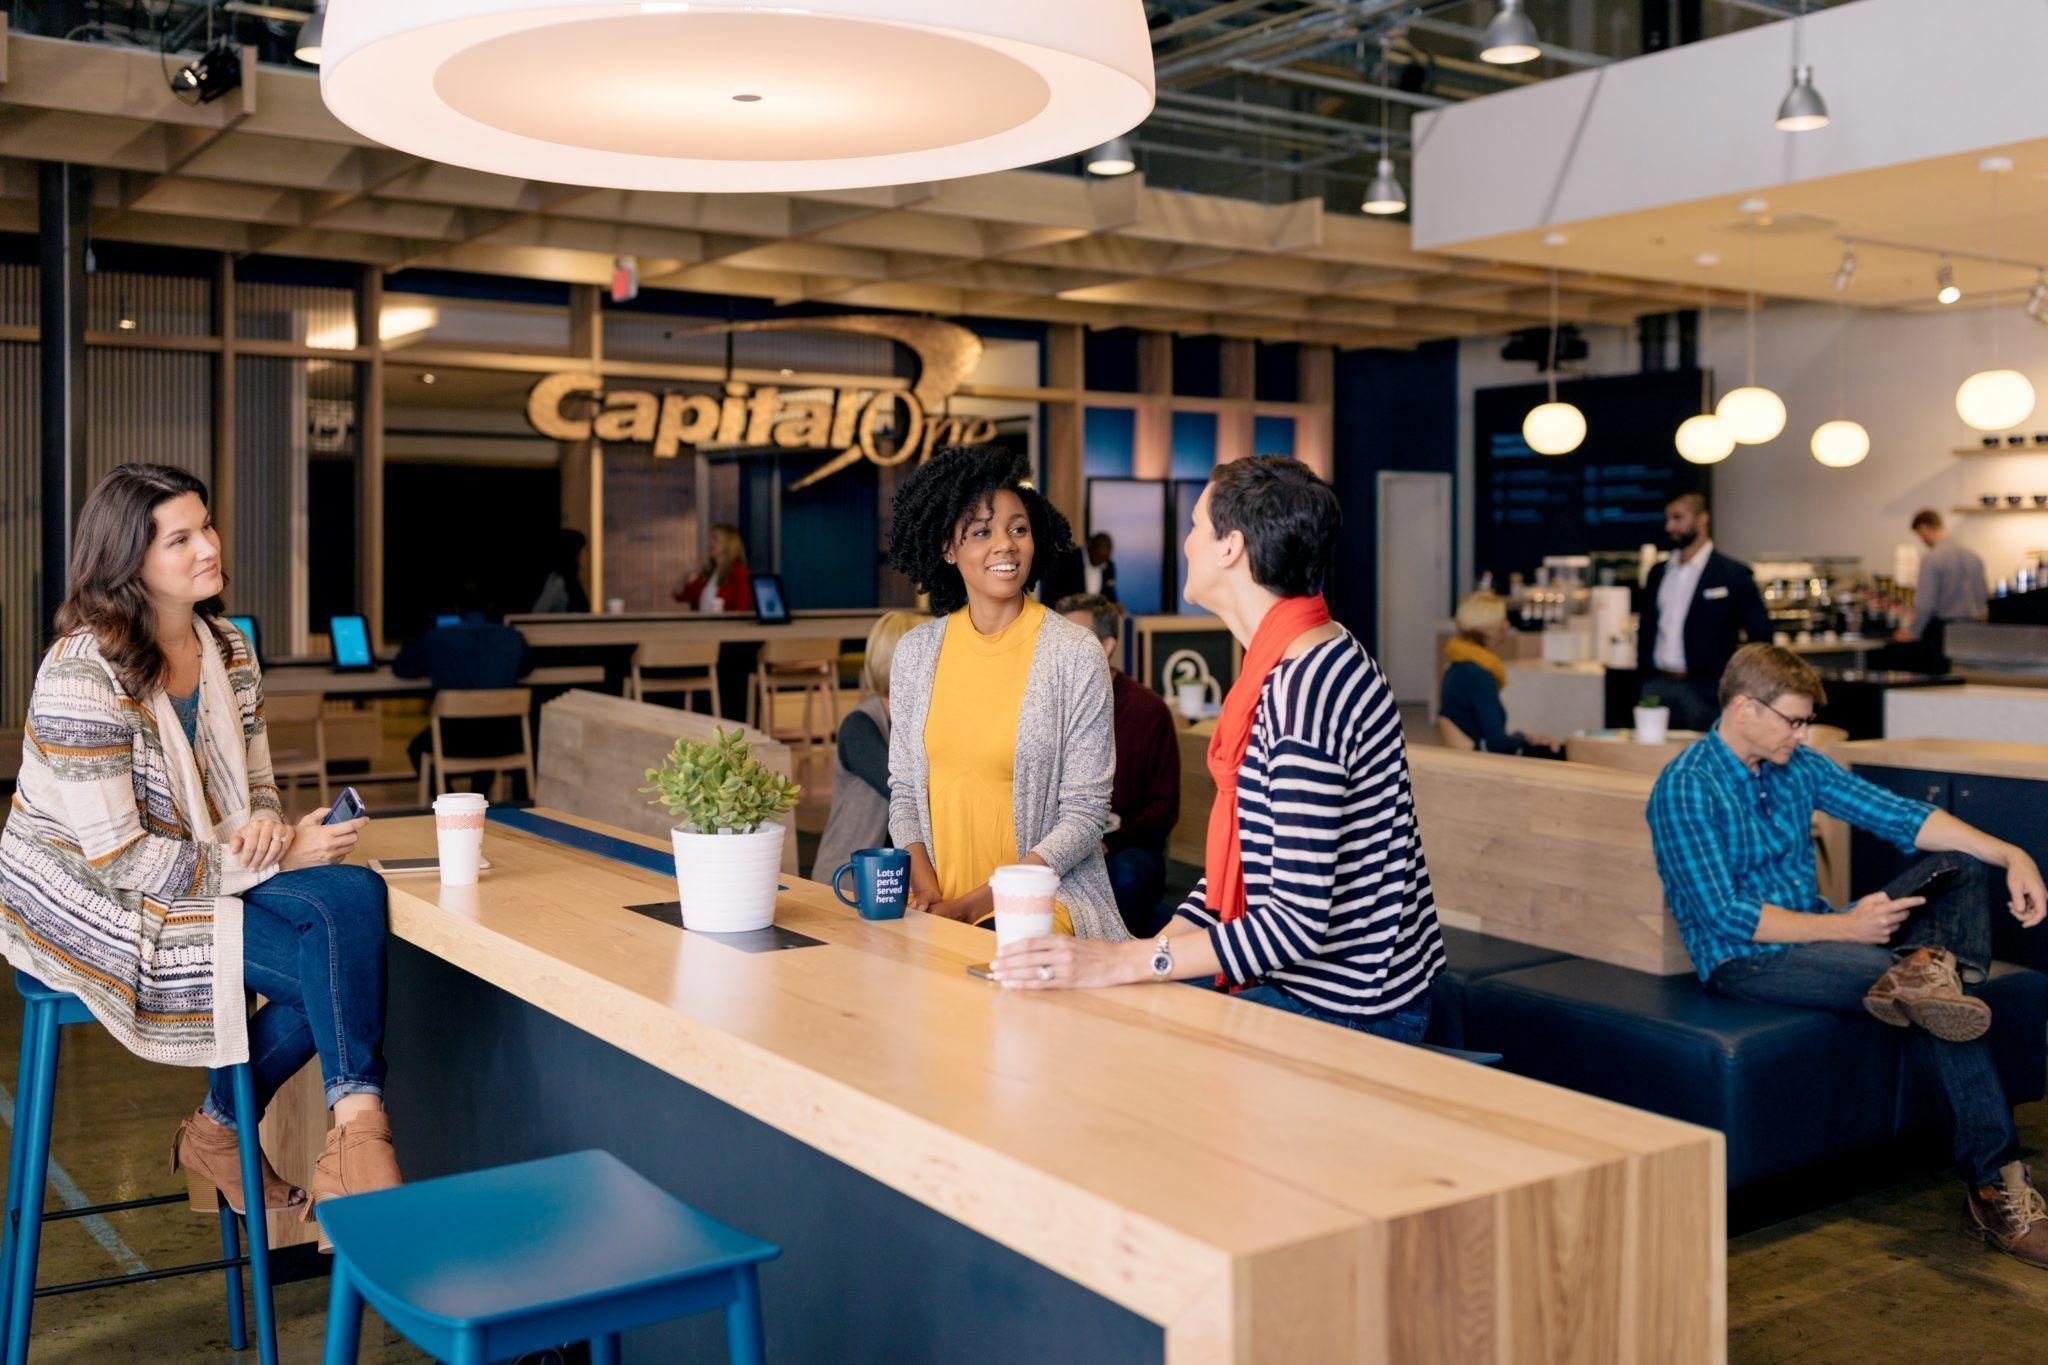 Capital One new experiential strategy bank branch rebrand interior design and innovation lifestyle concepts